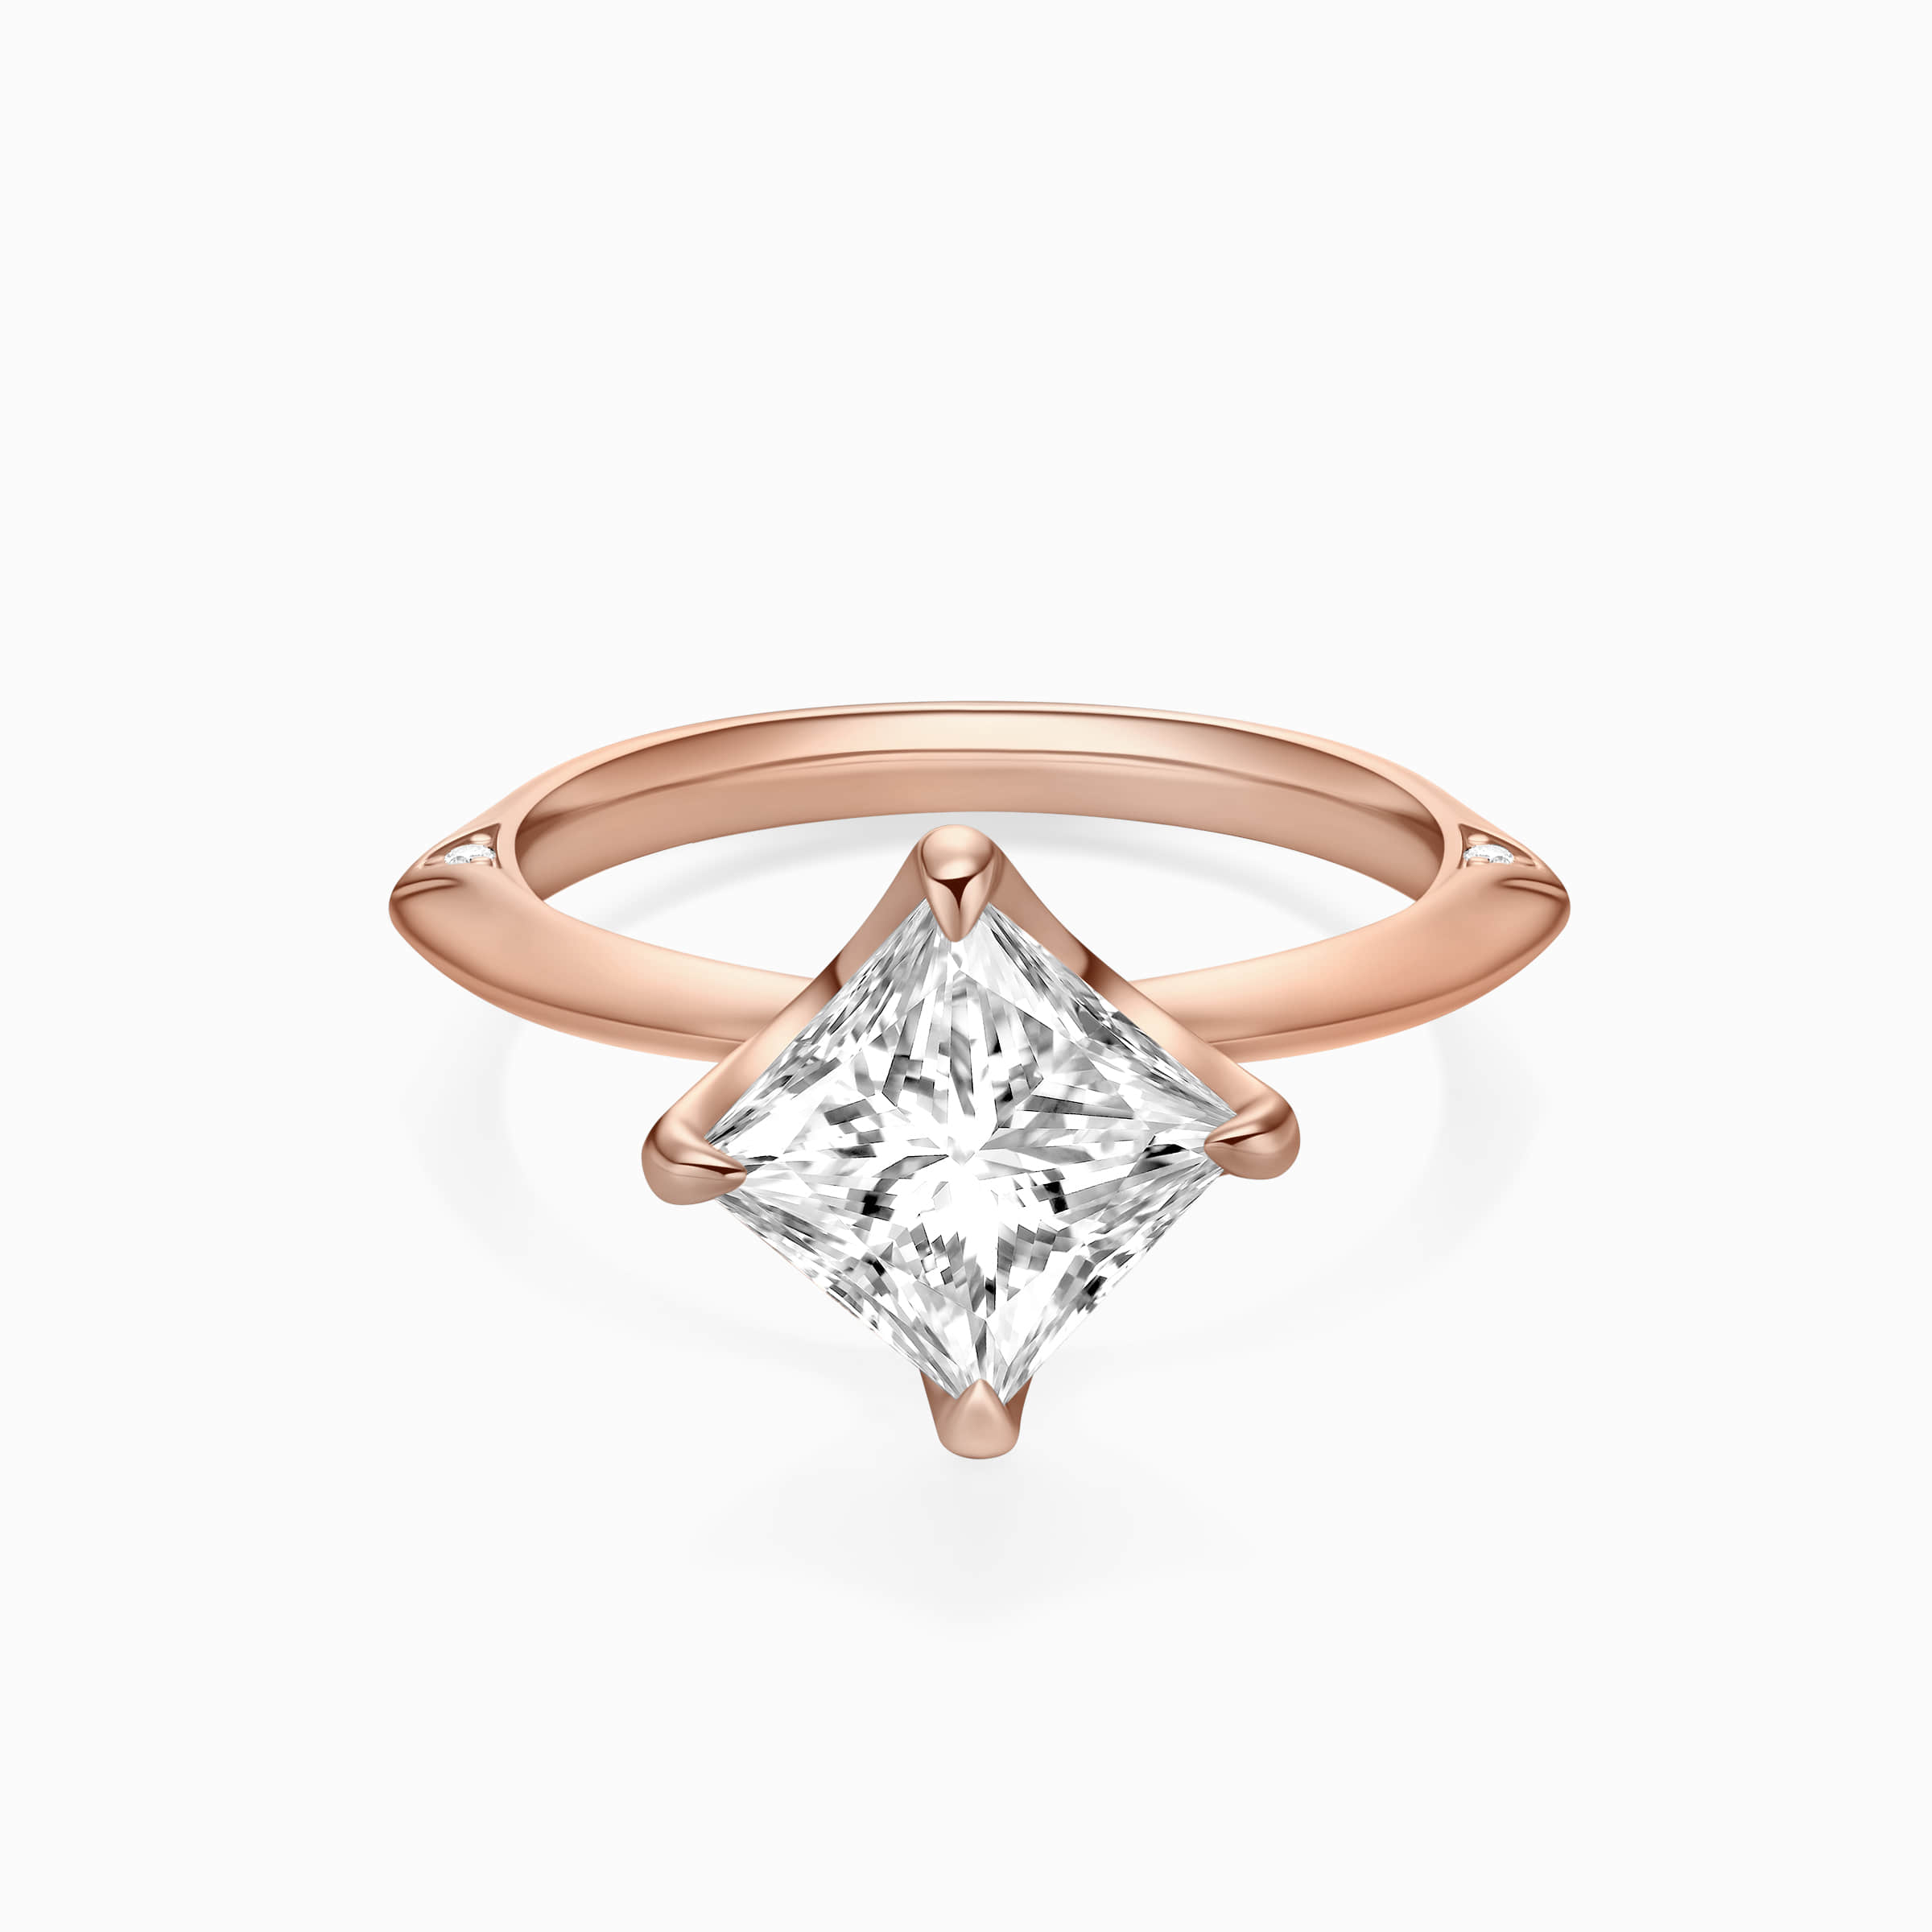 Darry Ring solitaire princess cut engagement ring in rose gold